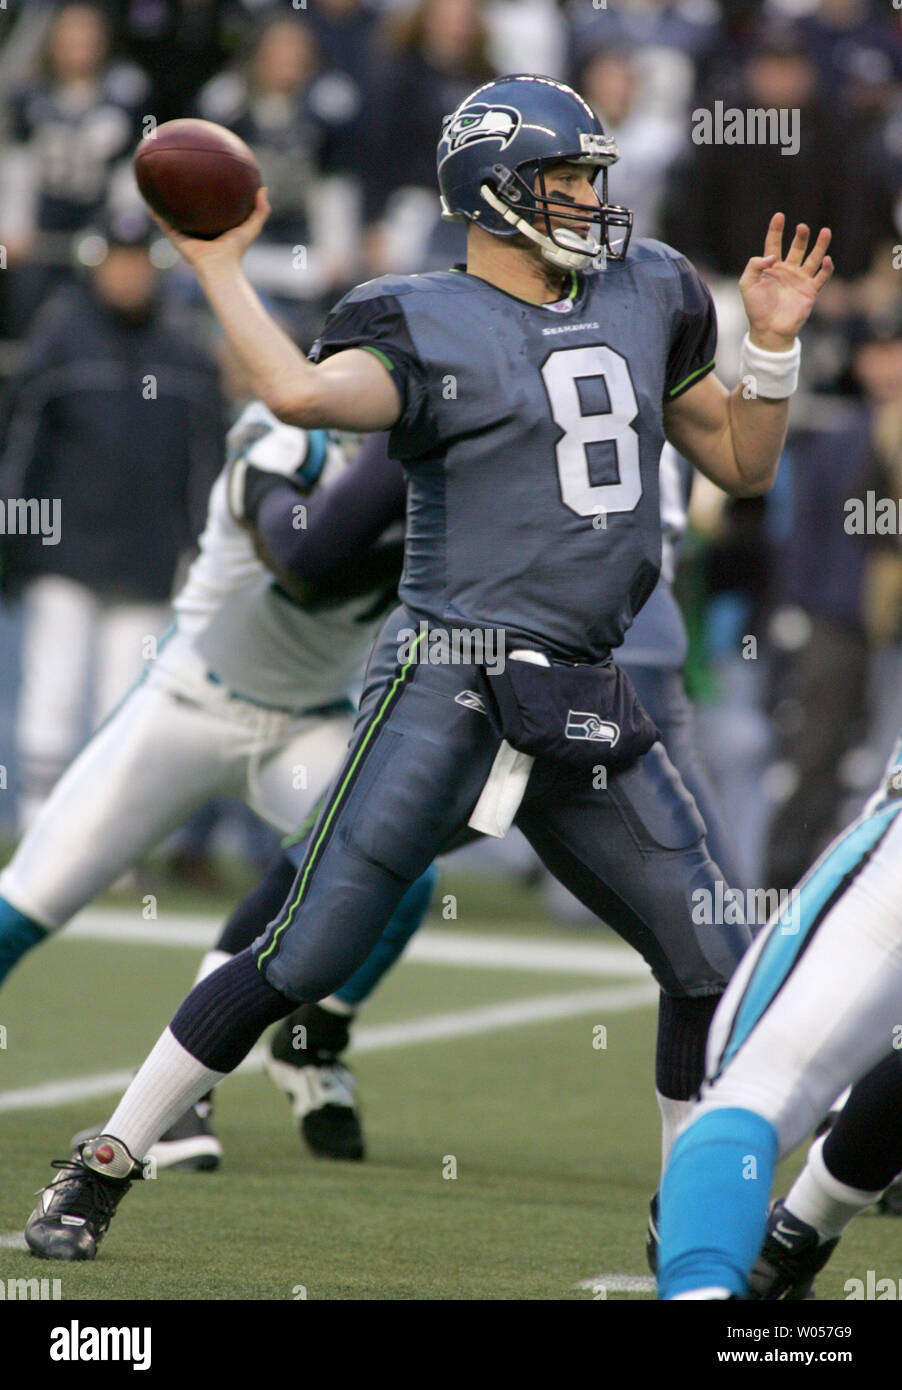 Seattle Seahawks QB Matt Hasselbeck throws a 17 yard TD pass to Jerramy Stevens in the first quarter of the NFC Championship at Qwest Field in Seattle on January 22, 2006.  (UPI Photo/Terry Schmitt) Stock Photo